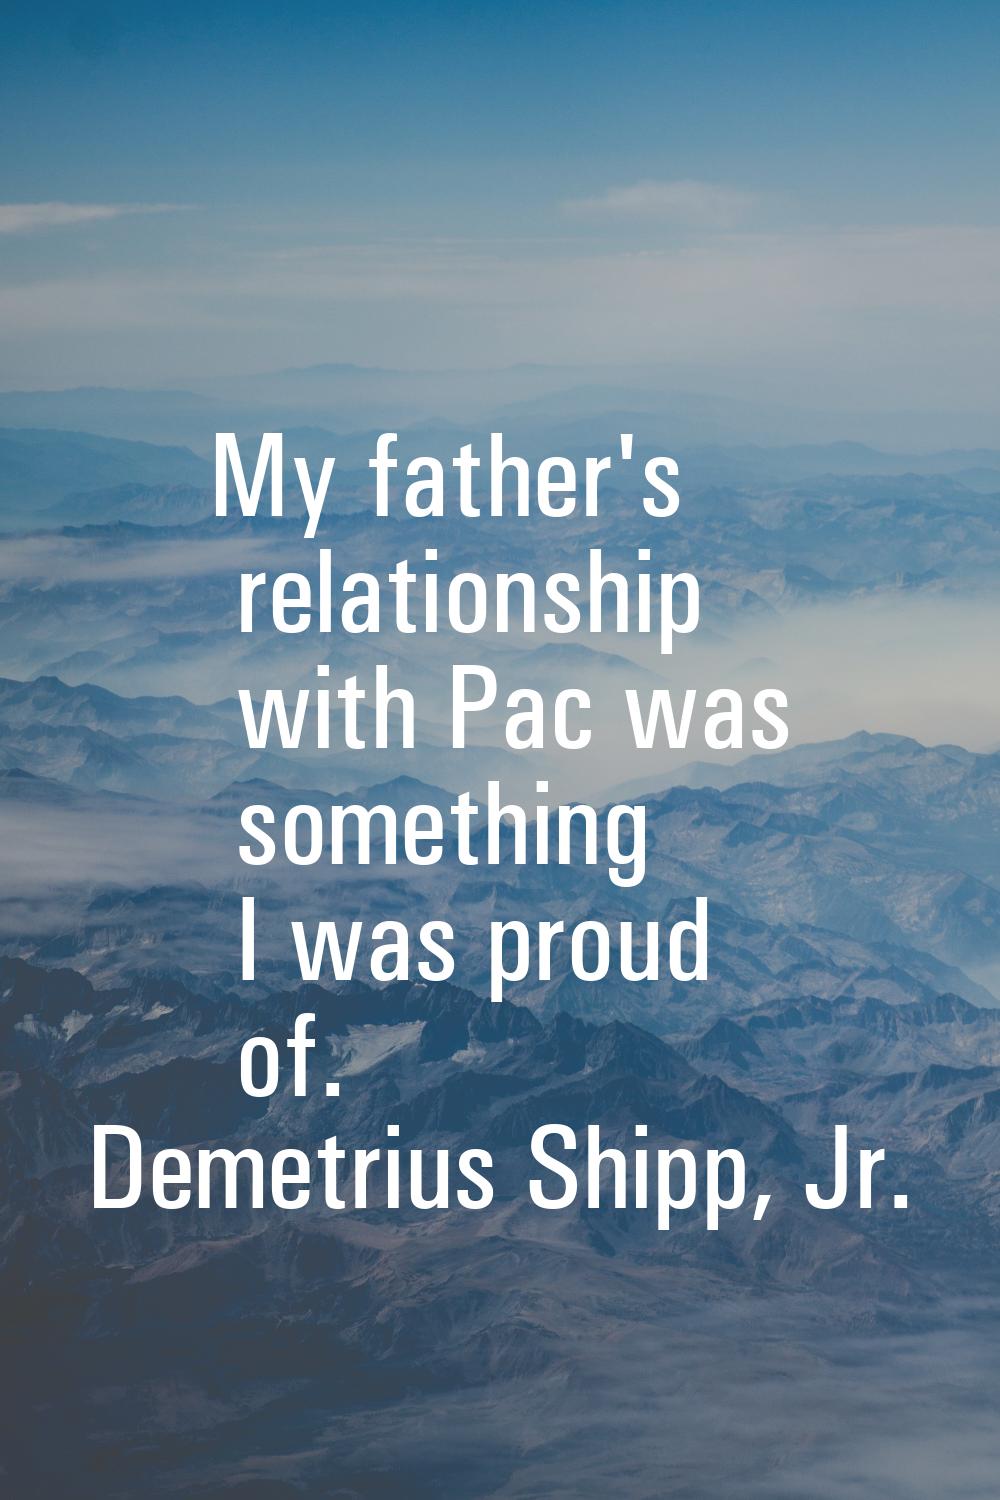 My father's relationship with Pac was something I was proud of.